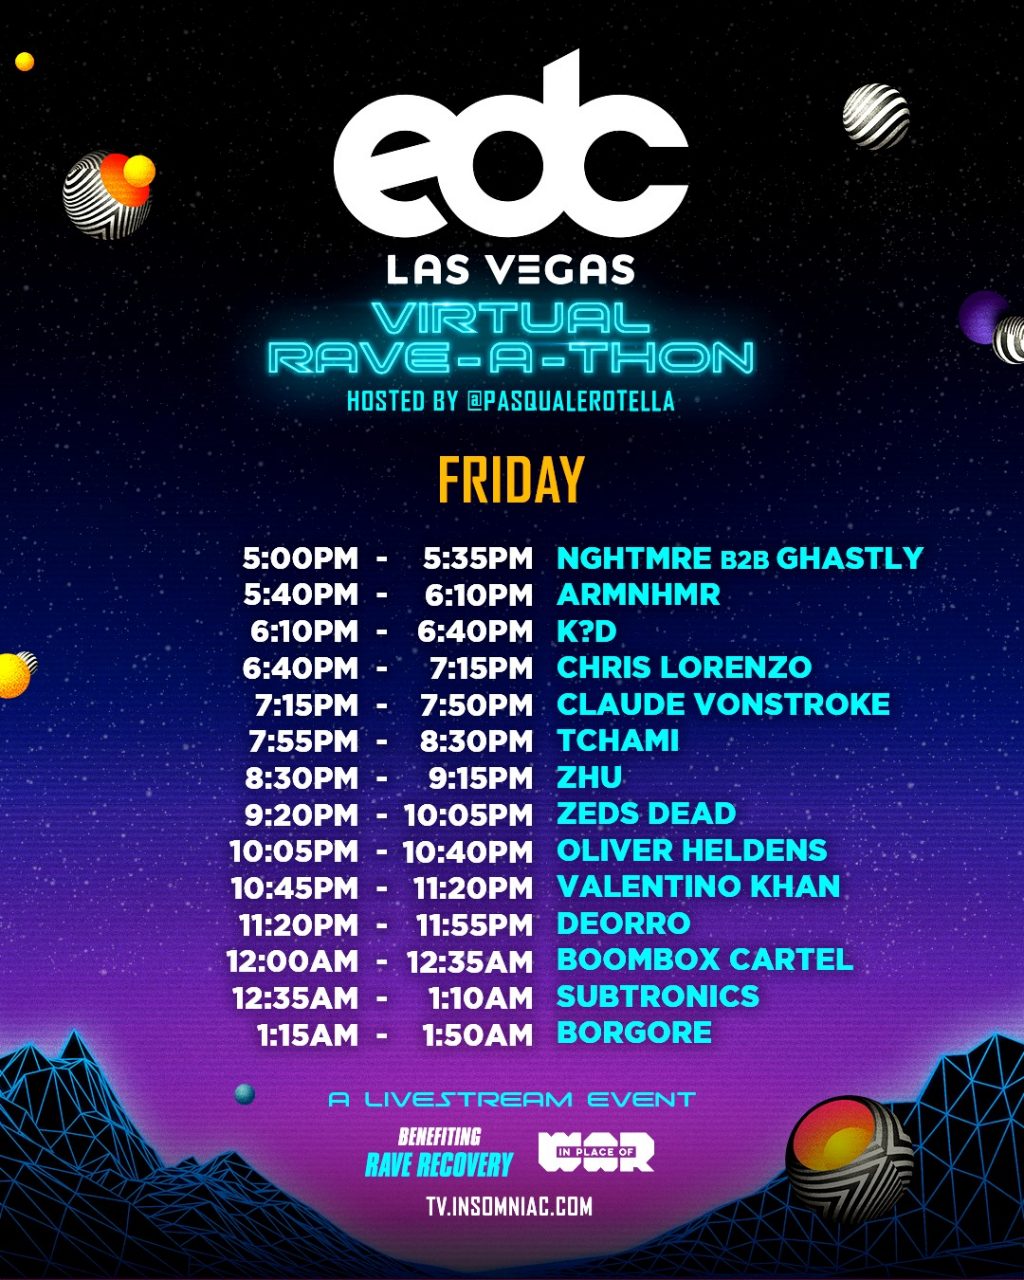 Plan your weekend with the EDC Las Vegas Virtual Rave-a-Thon schedule